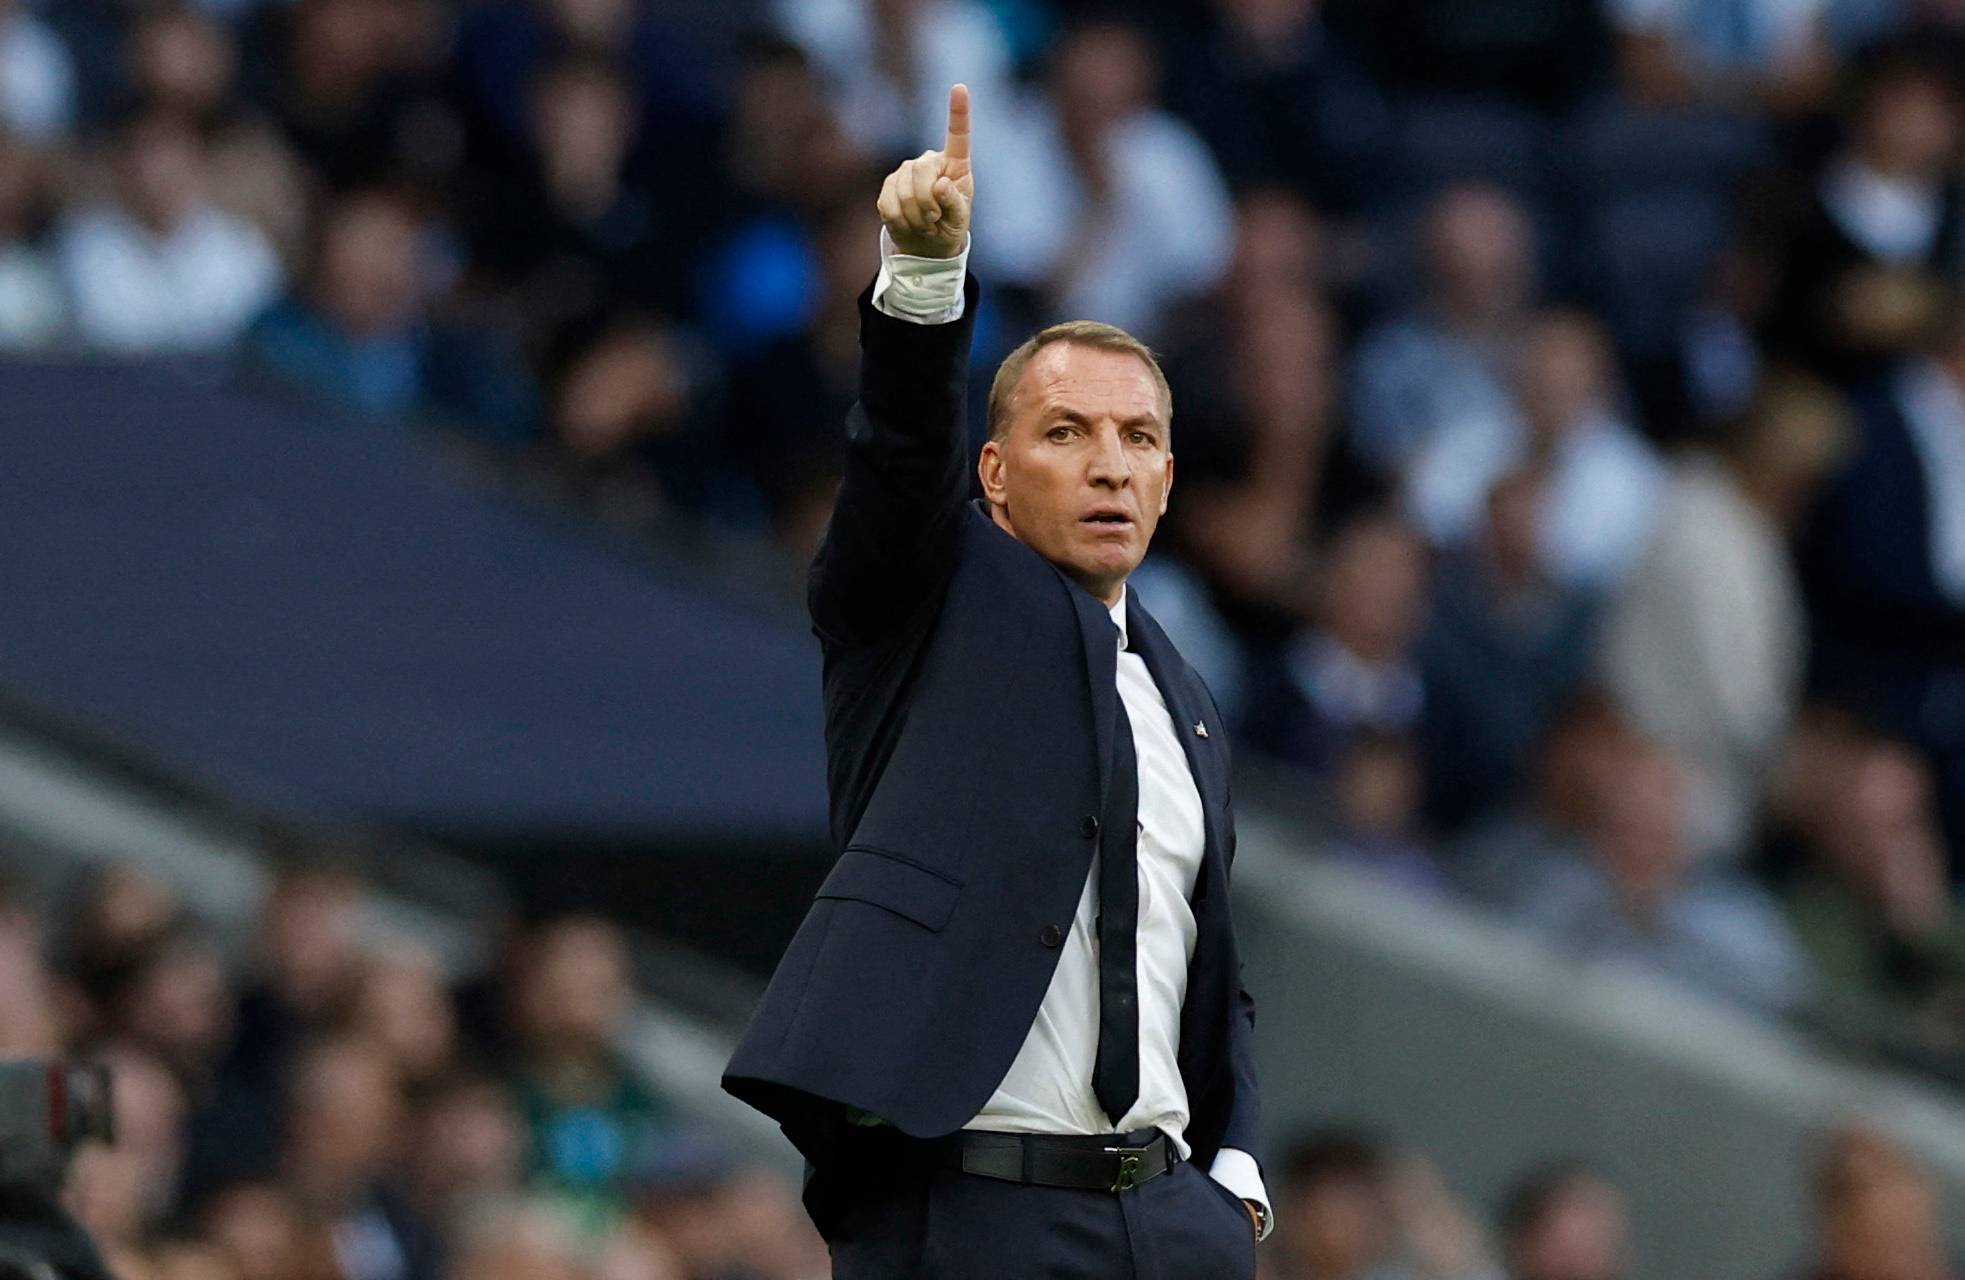 Leicester City manager Brendan Rodgers pointing during Tottenham match